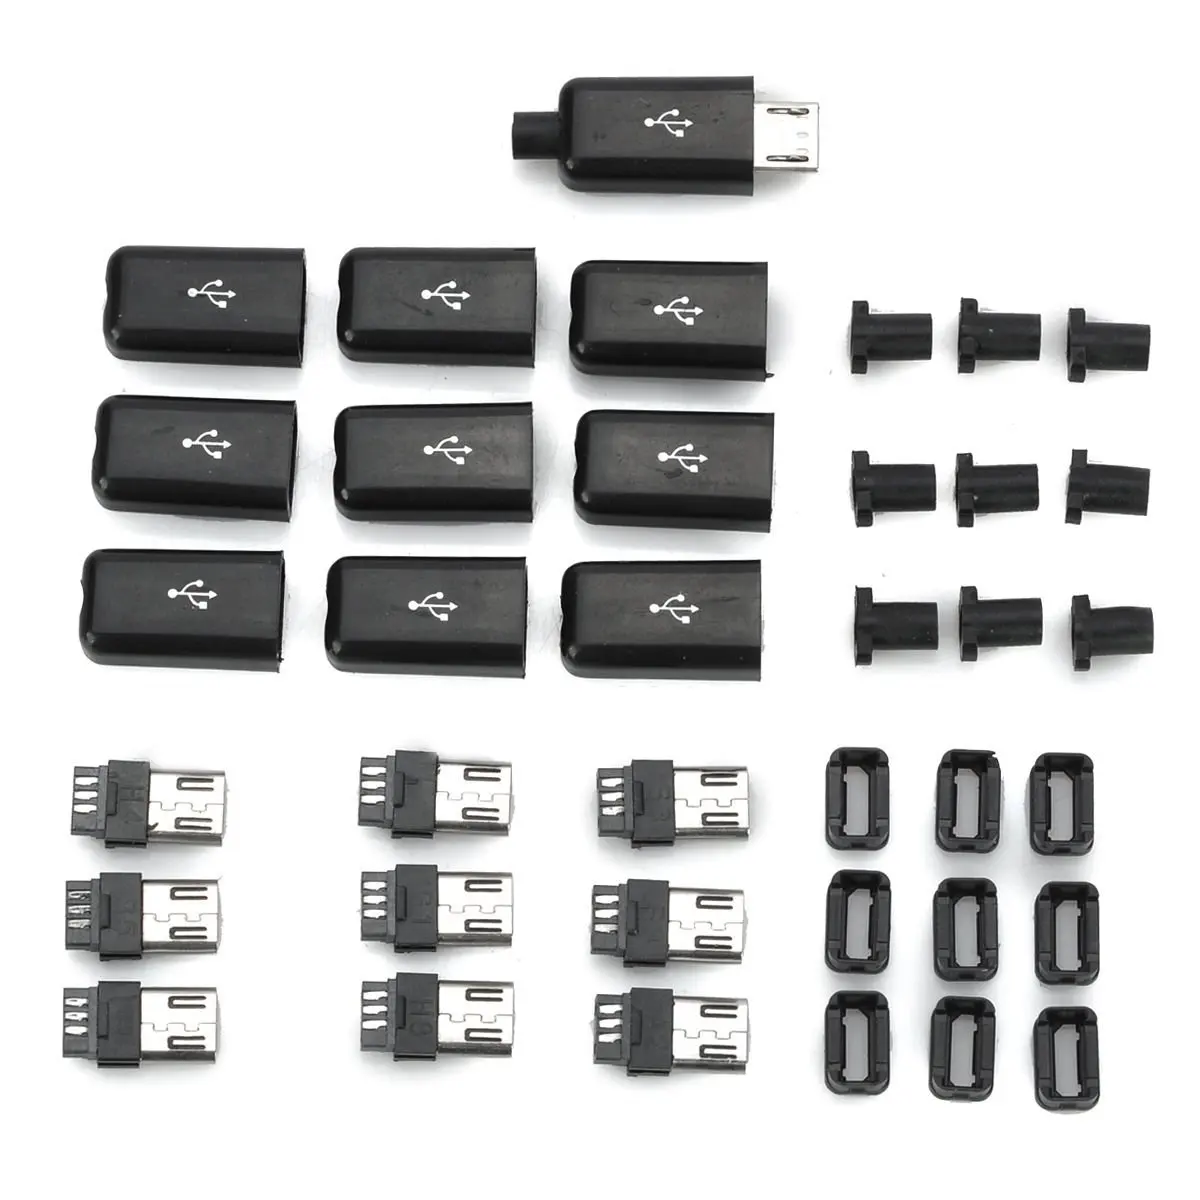 

10PCS/LOT Micro USB 5Pin Male connector plug kit Black/White welding Data OTG line interface DIY data cable accessories Type B